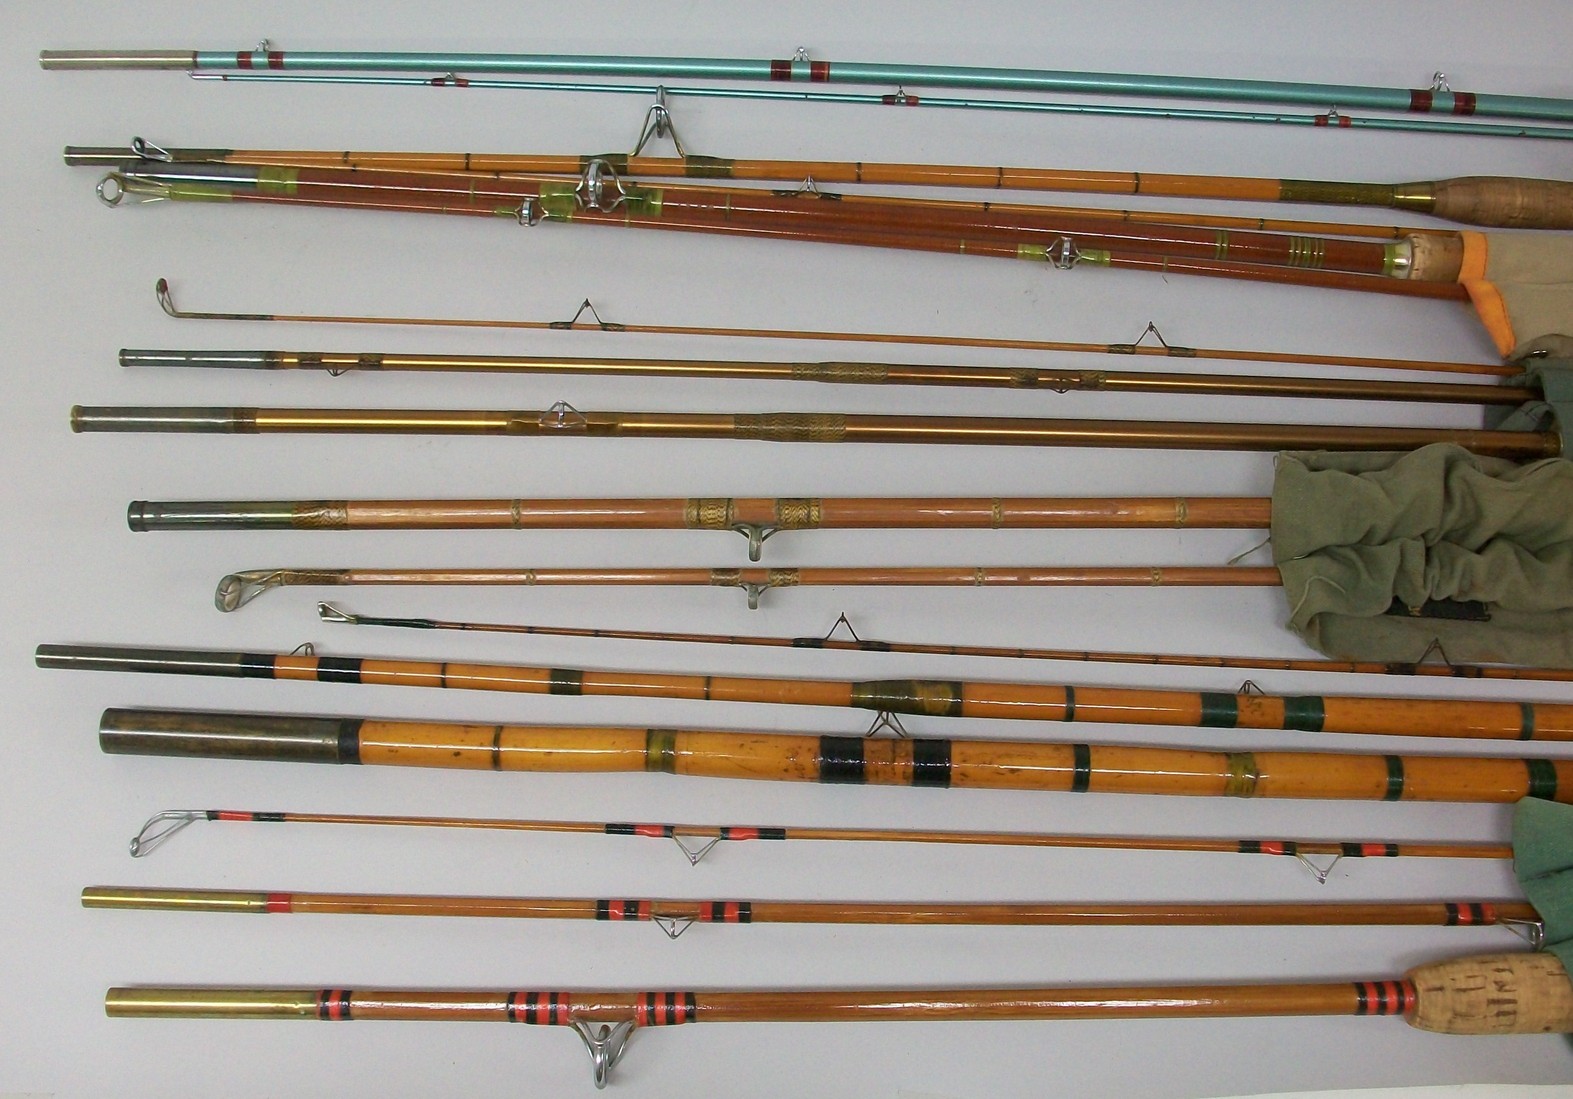 A group of seven vintage fishing rods comprising a Hardy Glaskona rod, Seaky Octopus rod, Poolson